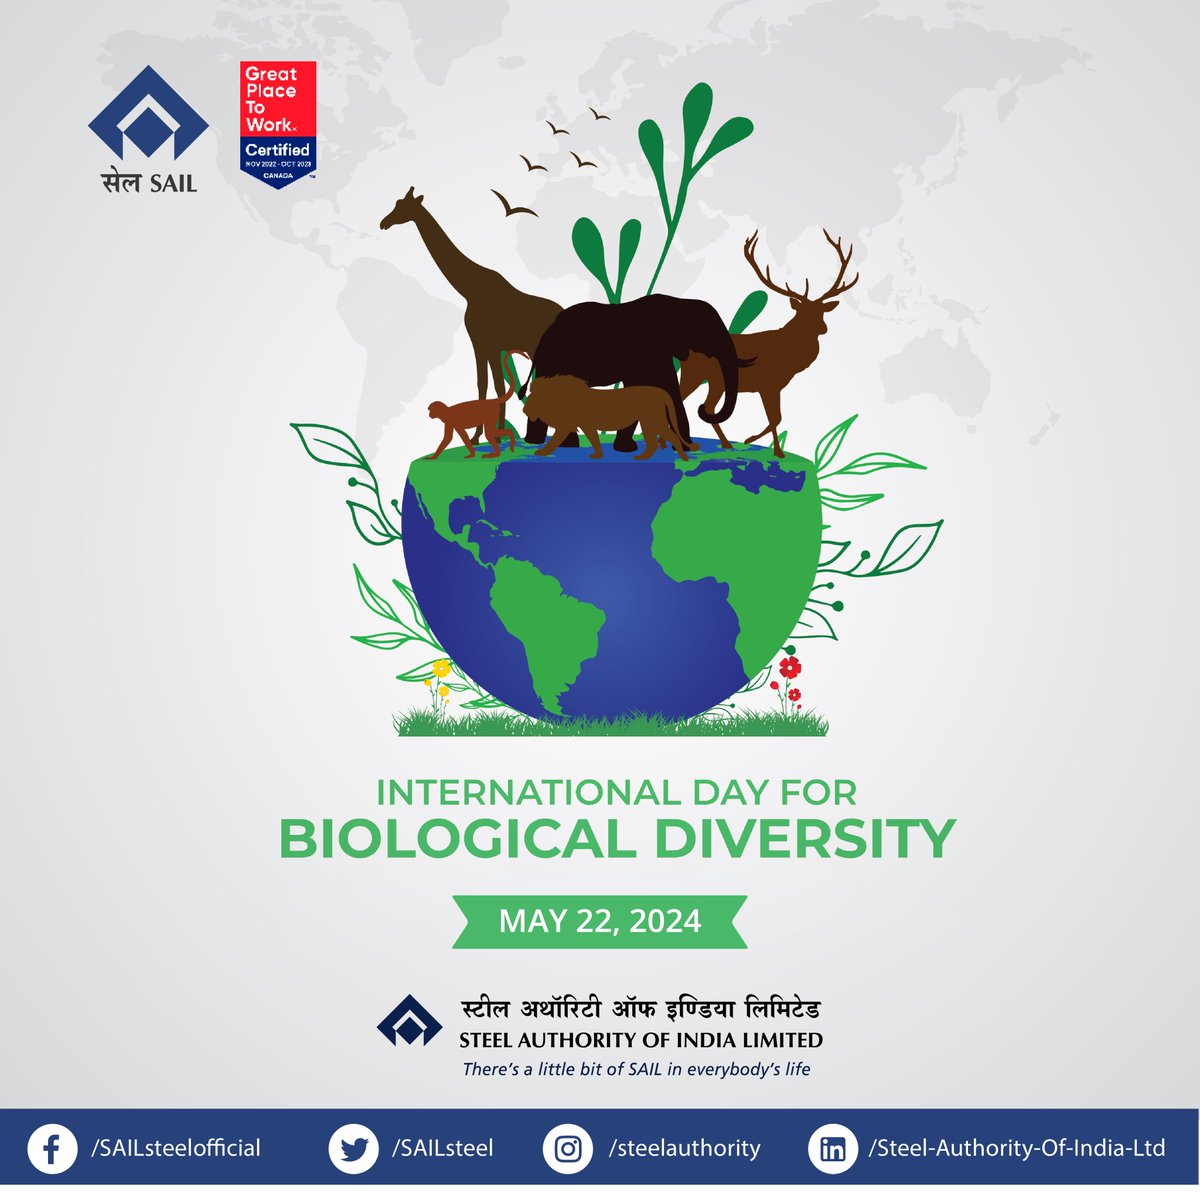 Protecting biodiversity is not just an environmental issue but a moral imperative for the well-being of present and future generations. Let us commit to taking action to promote harmony between humans and nature.

#BiodiversityDay #ForNature #ProtectOurPlanet